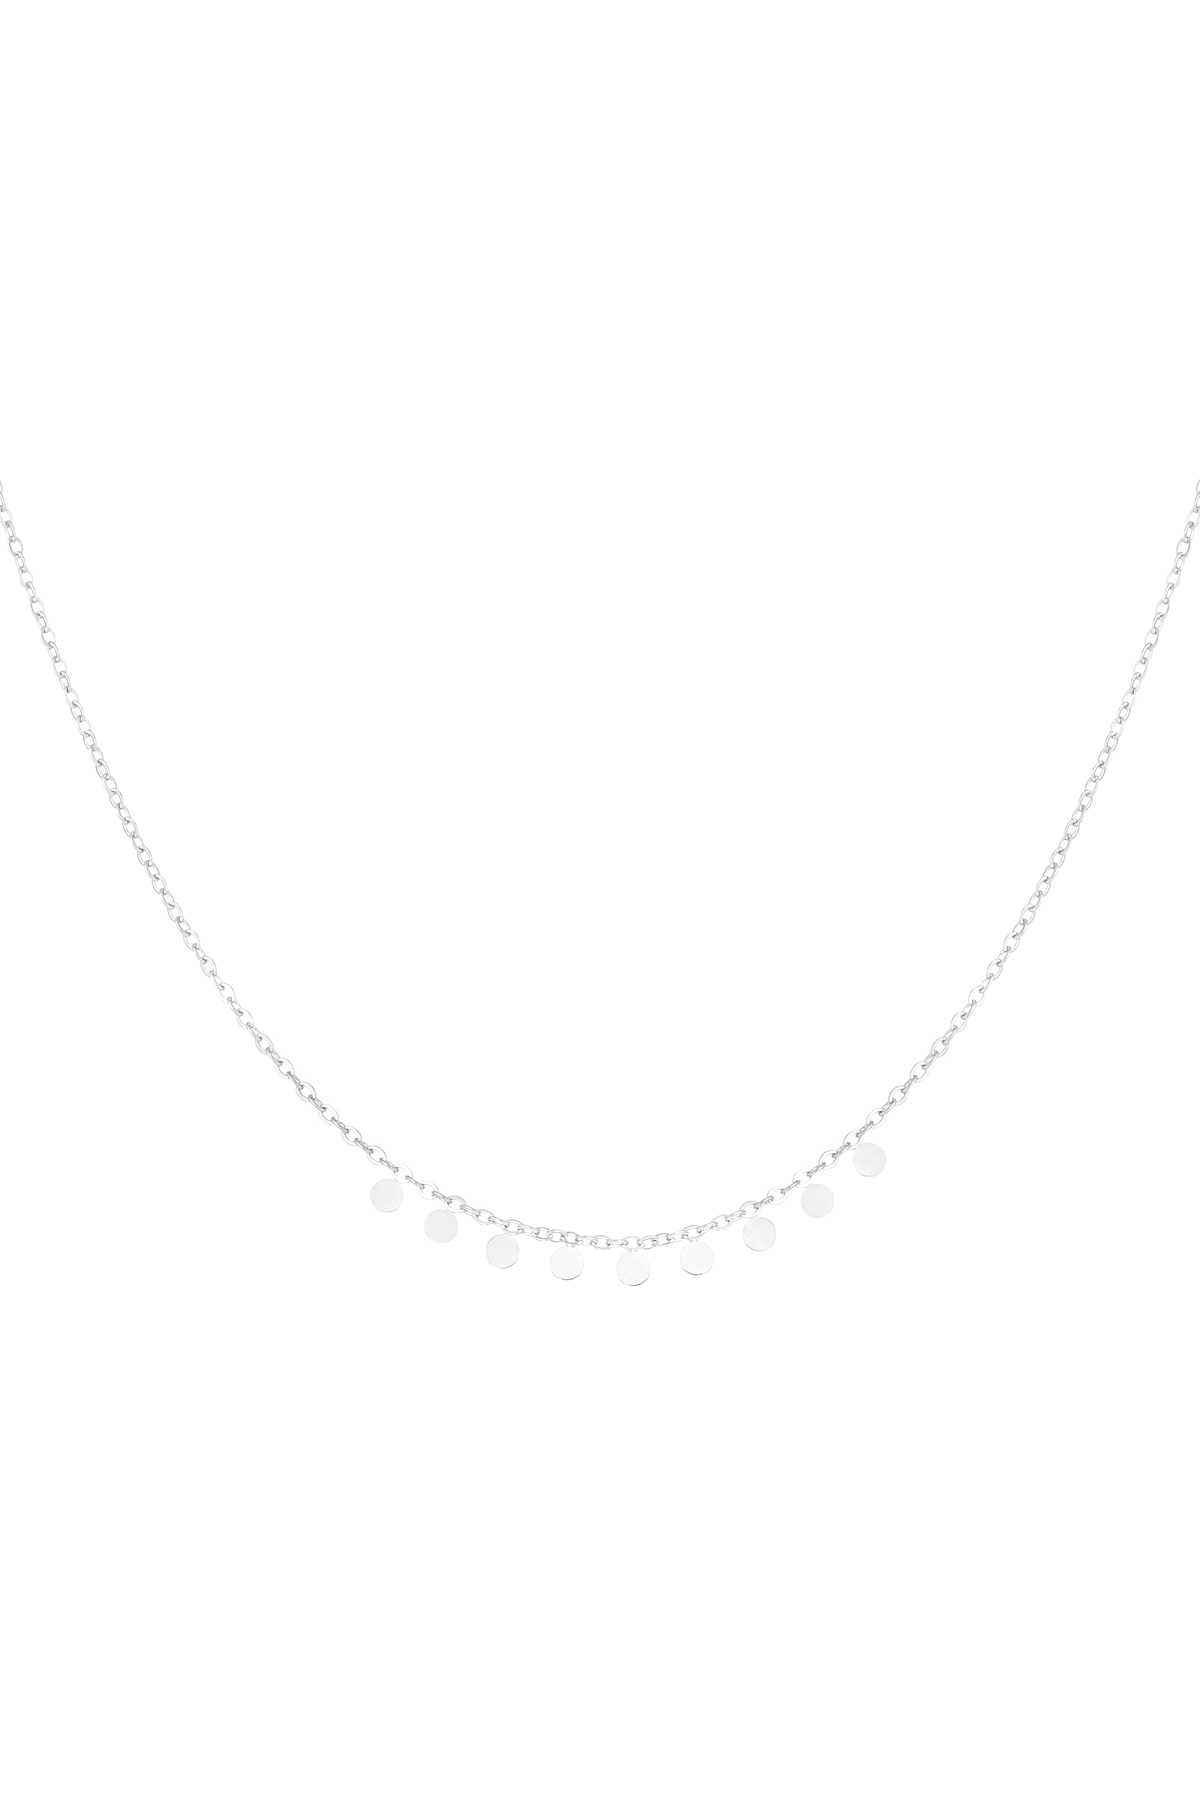 Simple necklace with round pendants - silver h5 